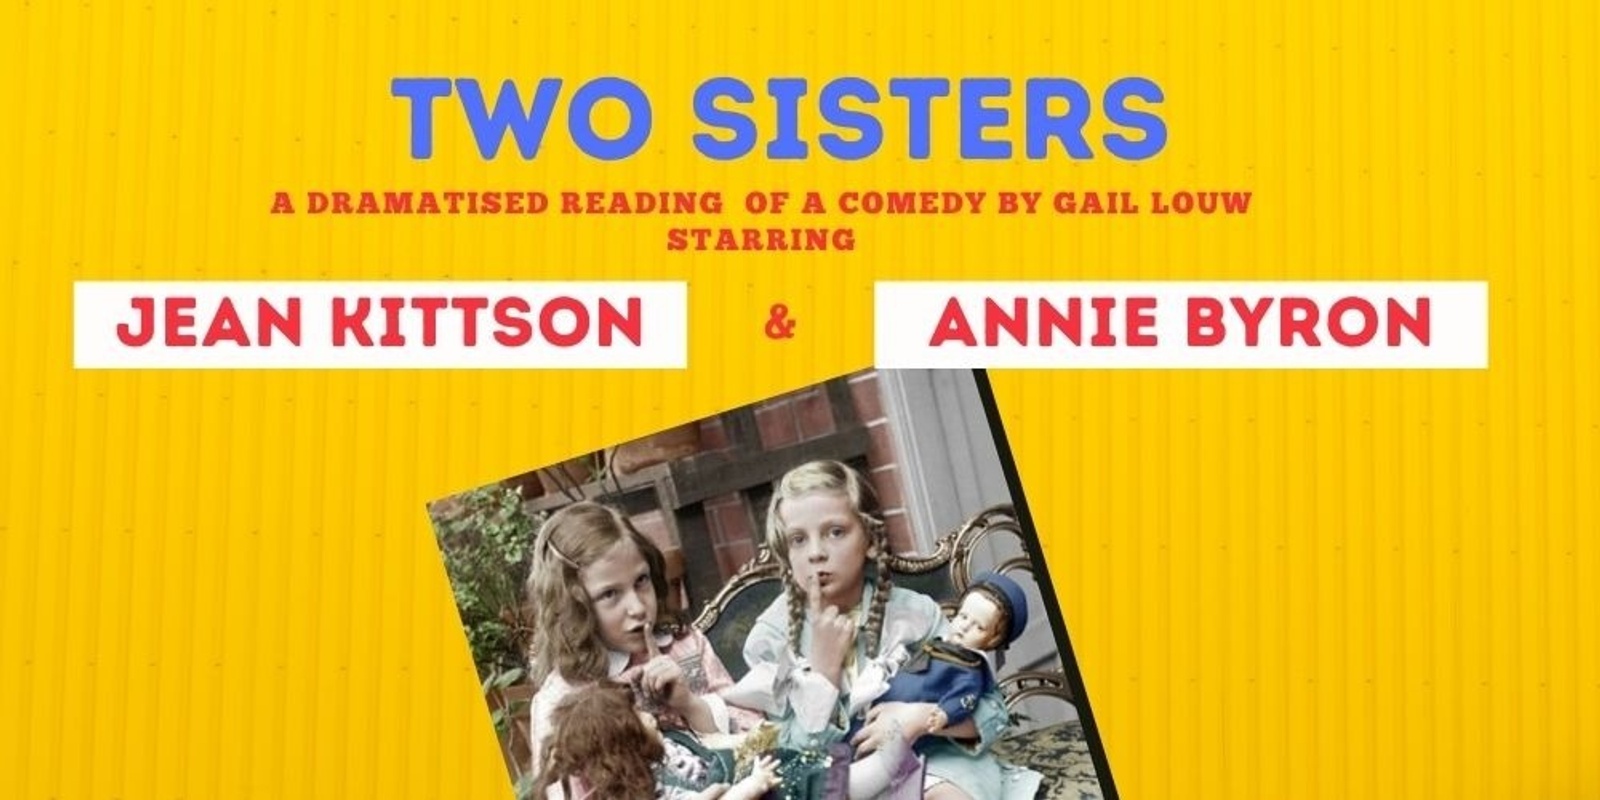 Banner image for Two Sisters starring Jean Kittson & Annie Byron